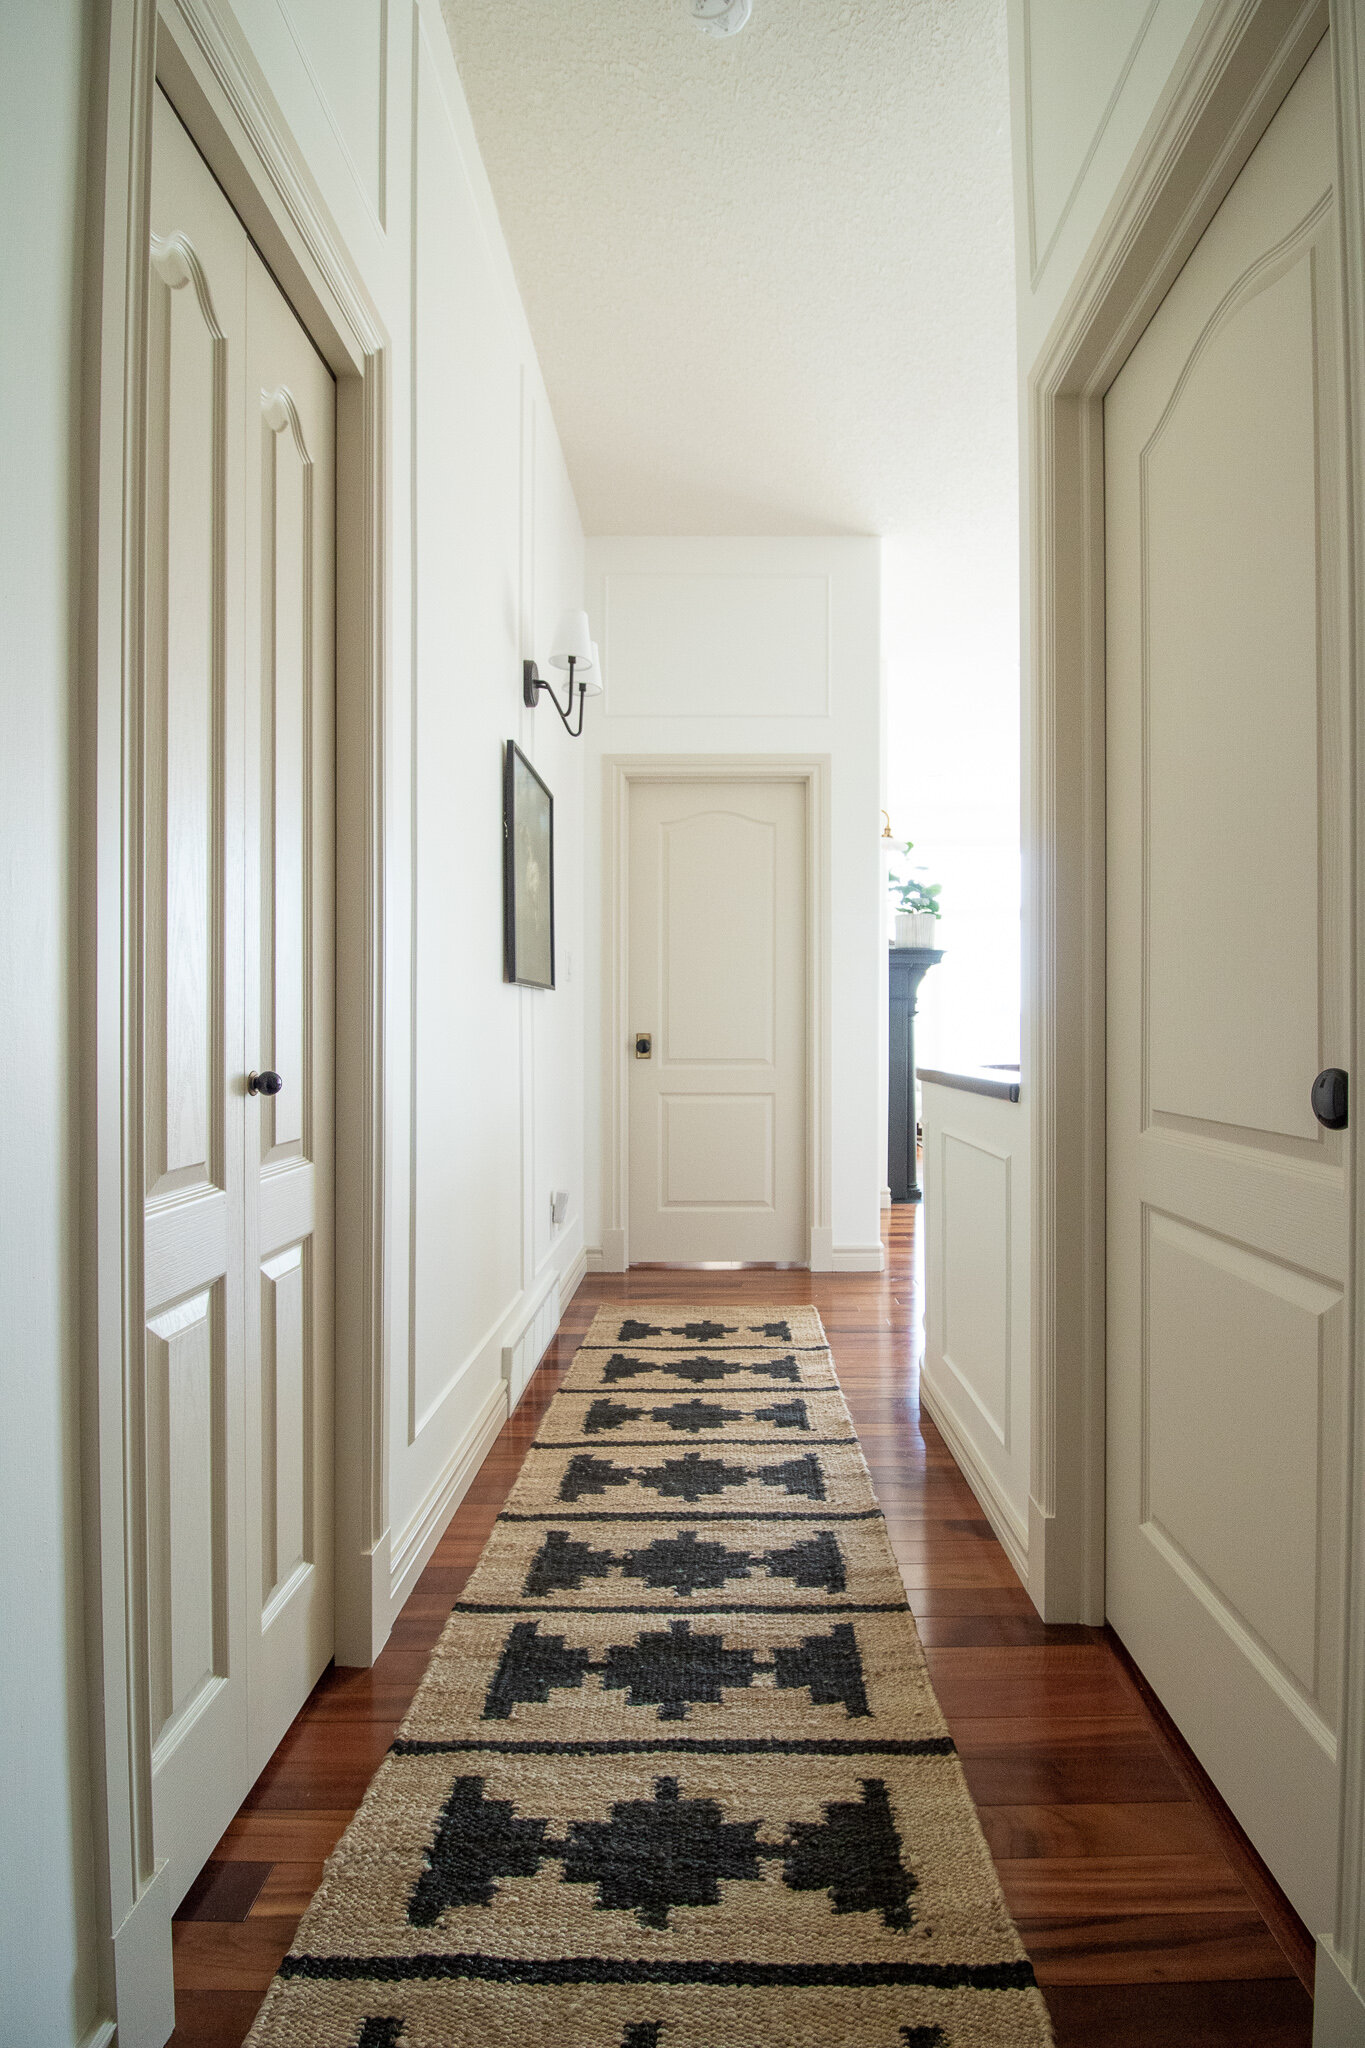 hallway with white walls with box trim moulding, beige trim and doors, black sconce, jute runner with black geometric design and brass and black doorknobs